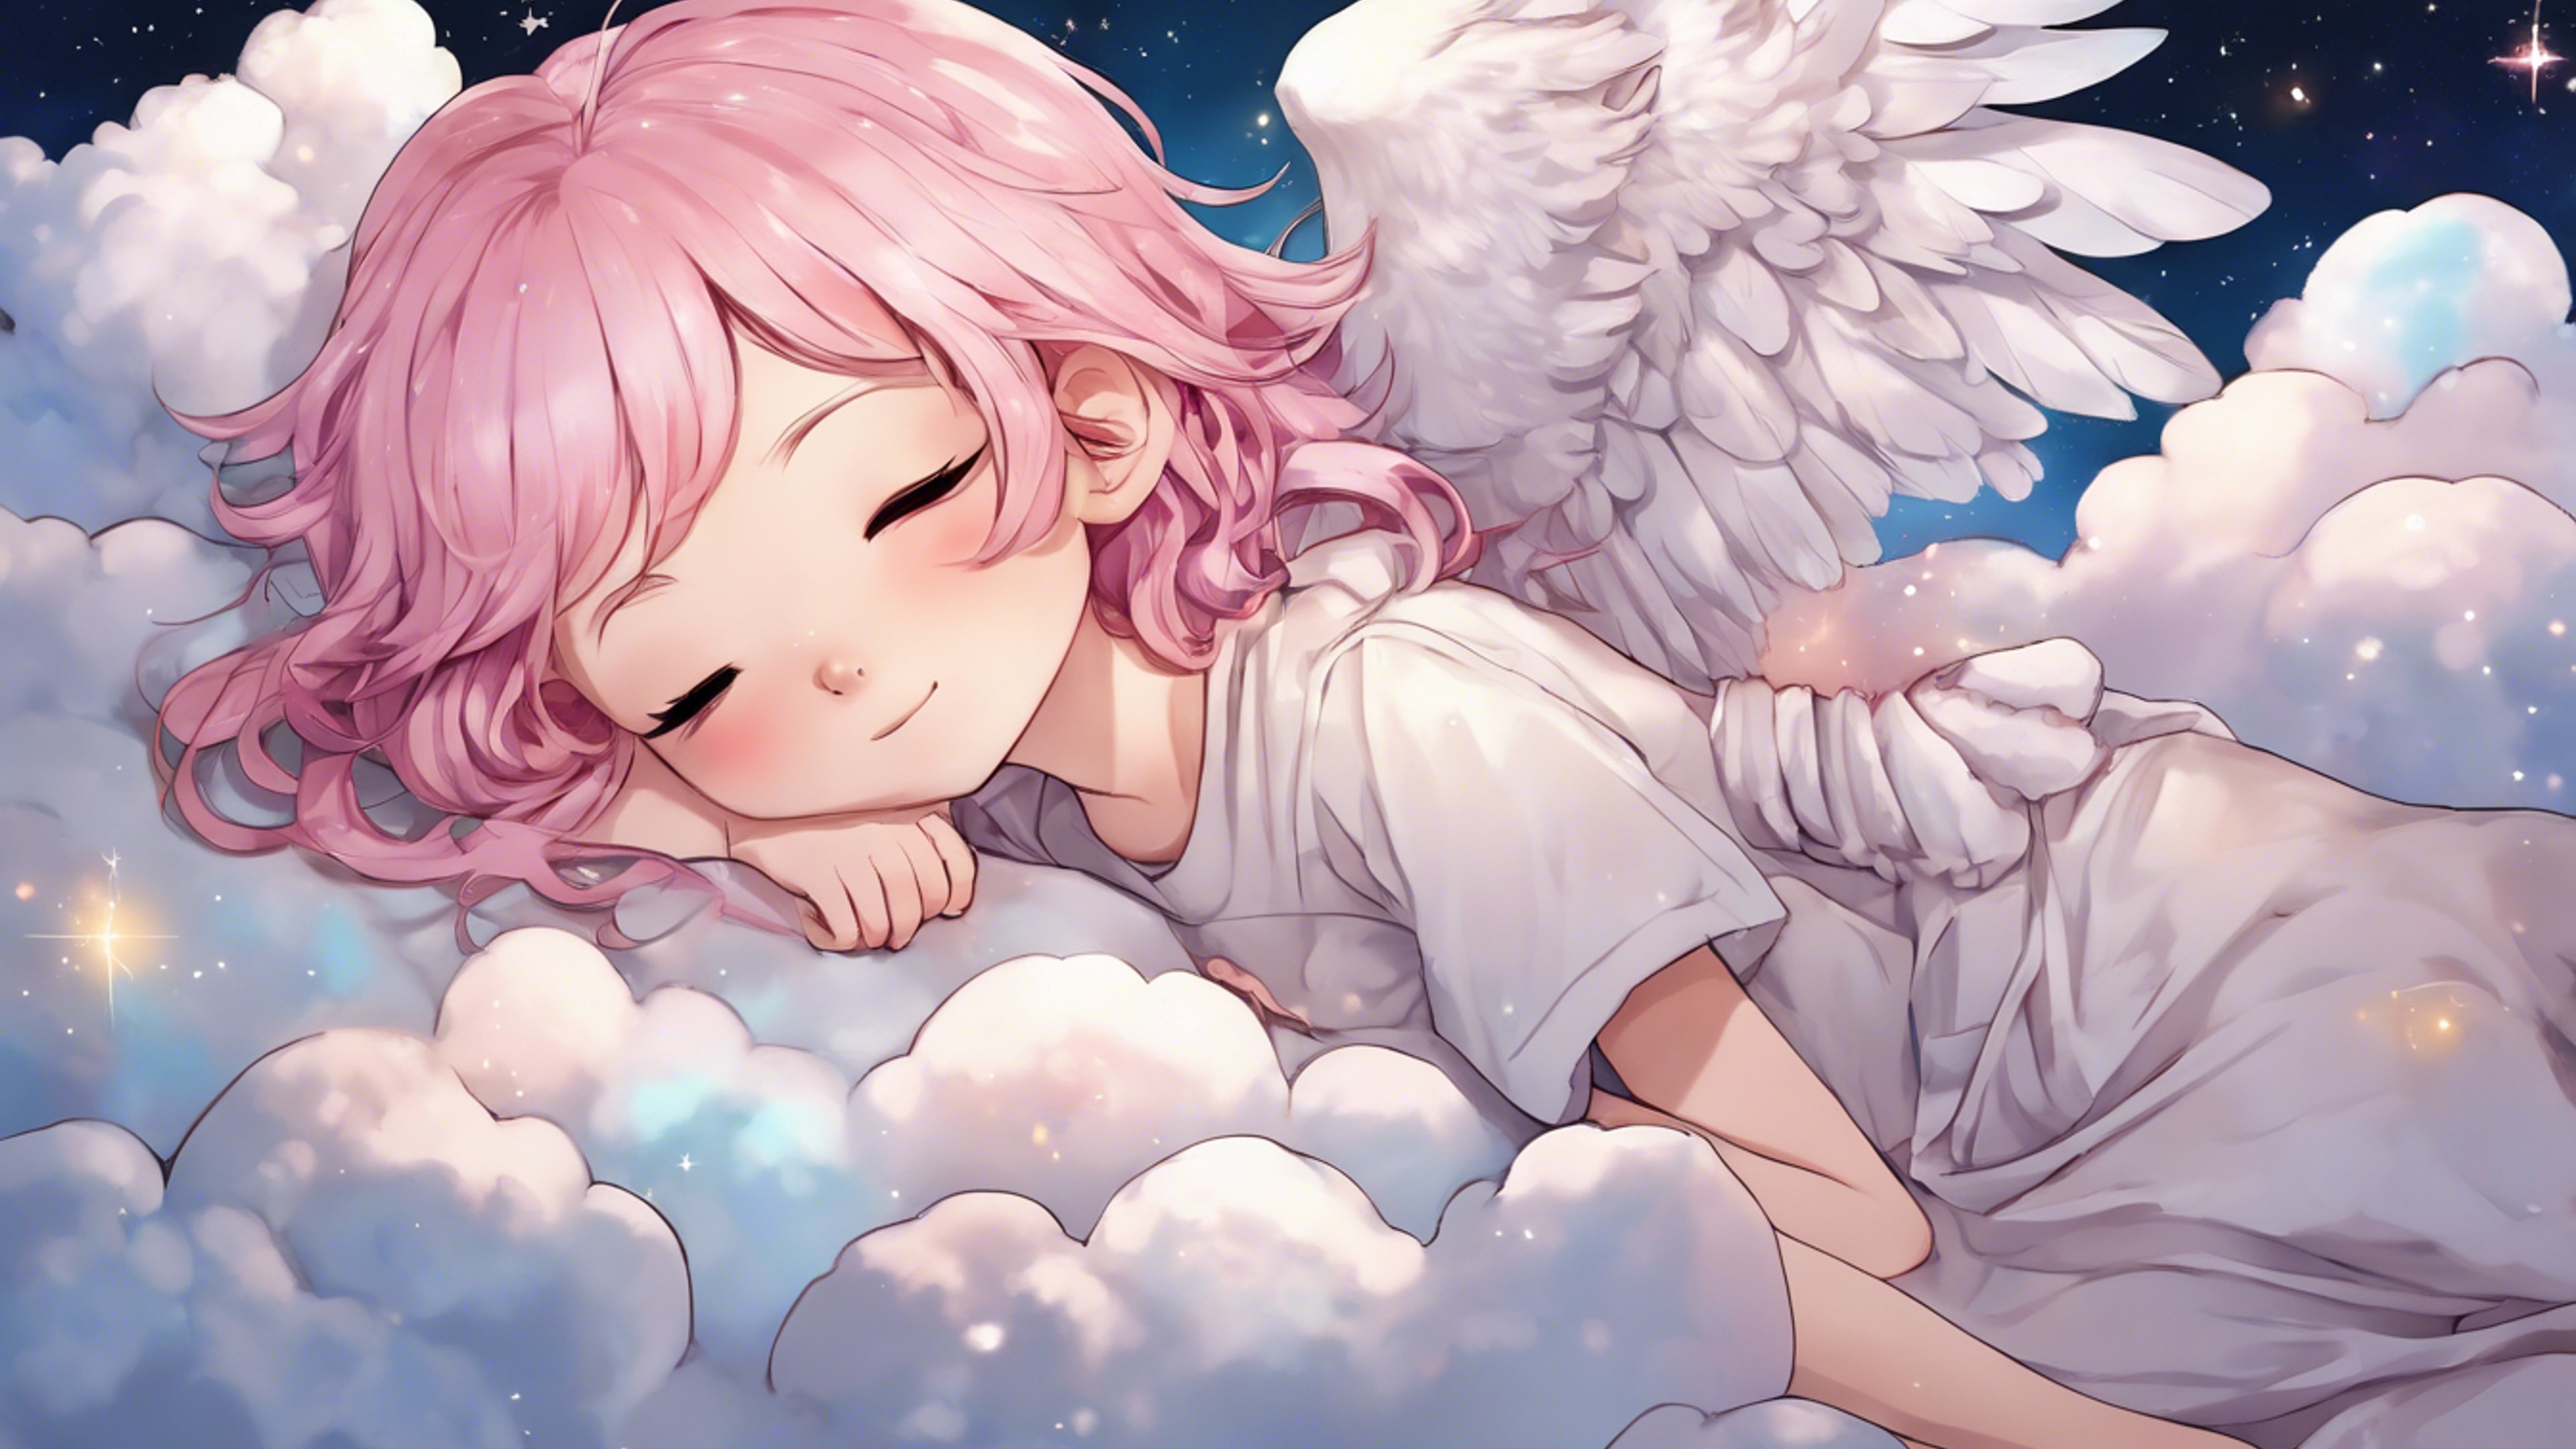 A chibi-style anime girl with pastel pink hair and angel wings, sleeping peacefully on a fluffy cloud under a starry night sky. Валлпапер[4a6f35b80bd74bd2872d]